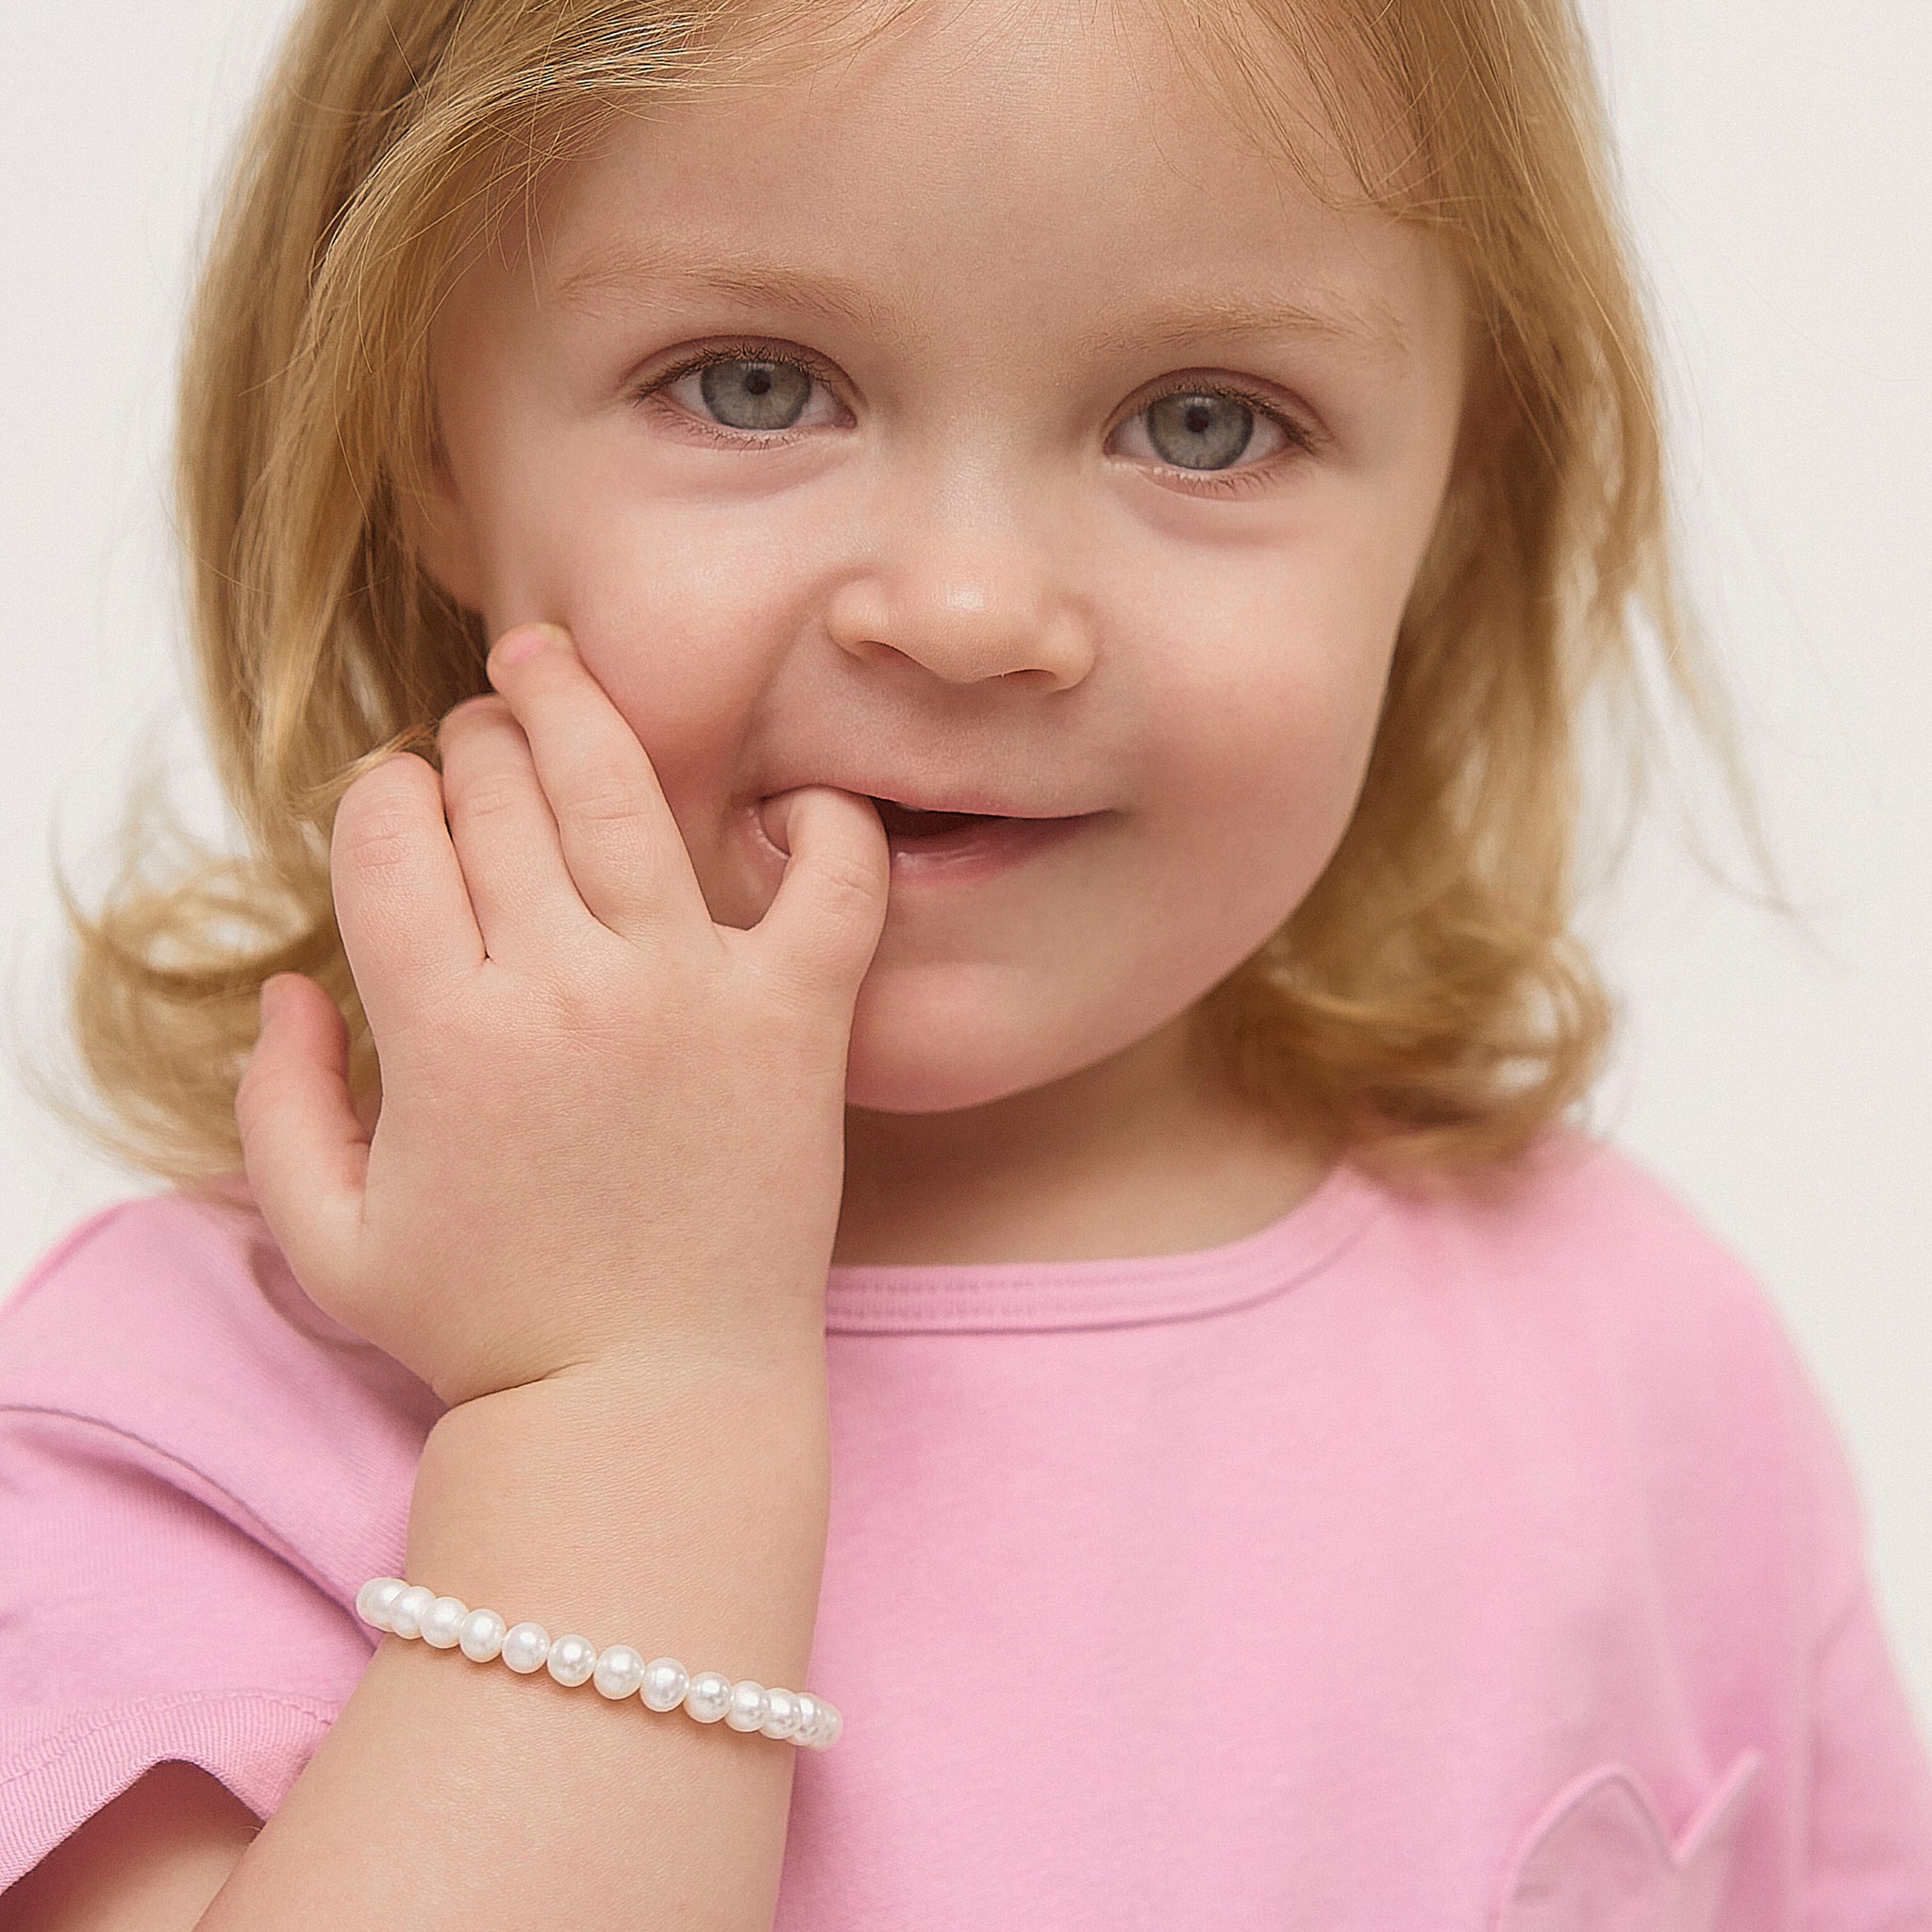 Kids and Baby Initial Bracelet with 2 Letters